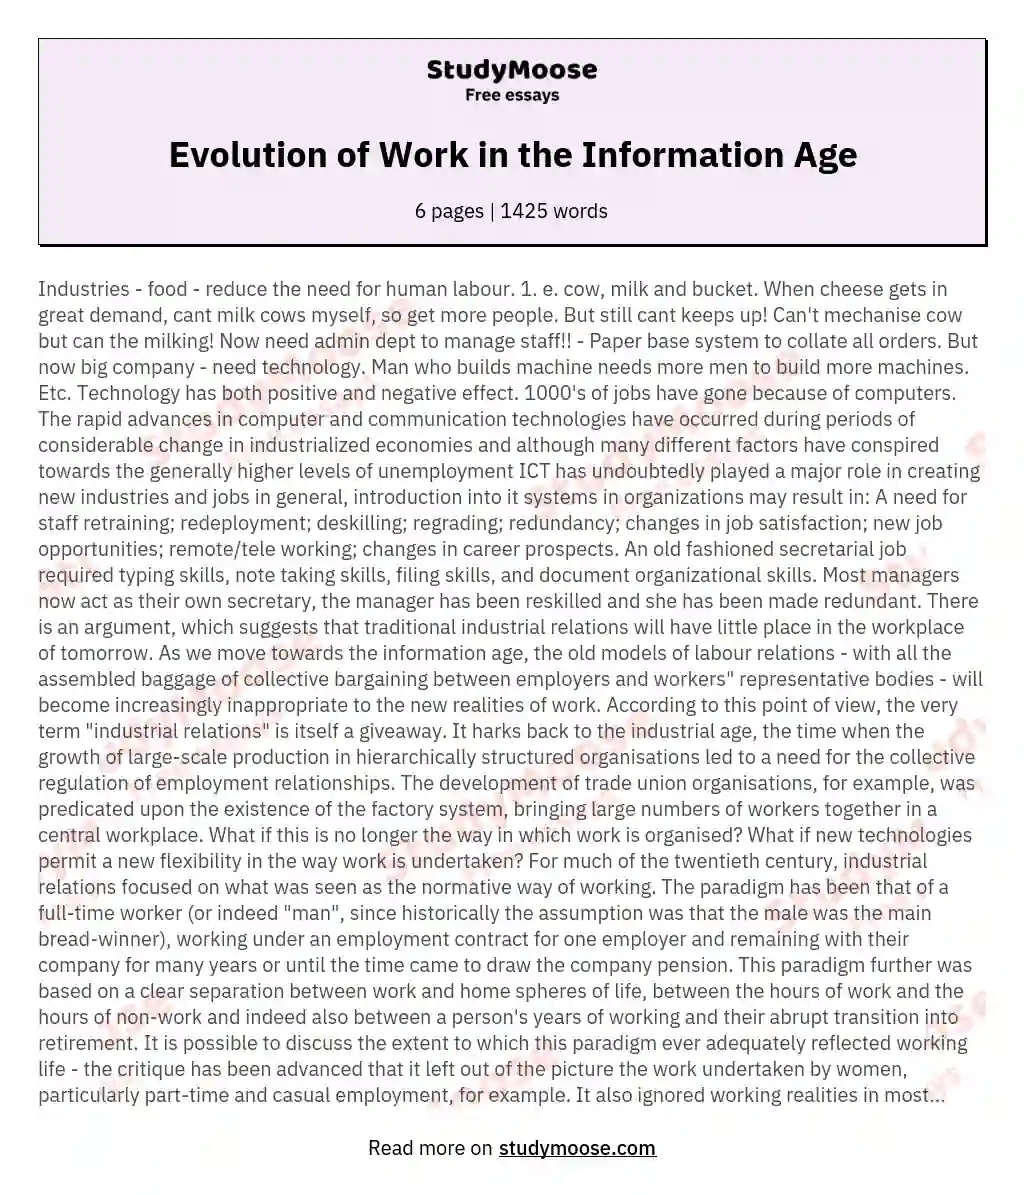 Evolution of Work in the Information Age essay